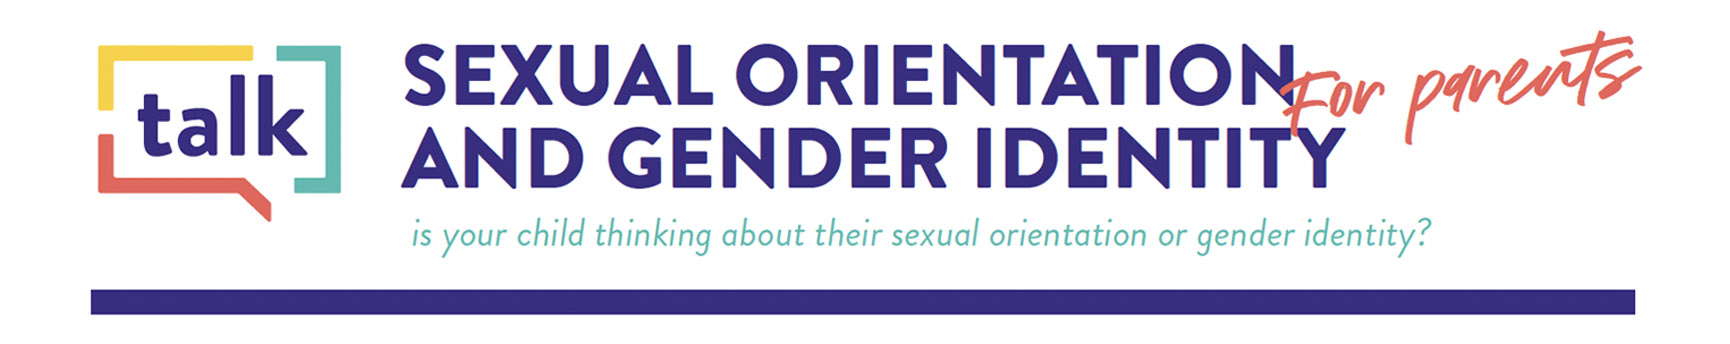 Sexual Orientation & Gender Identity for Parents